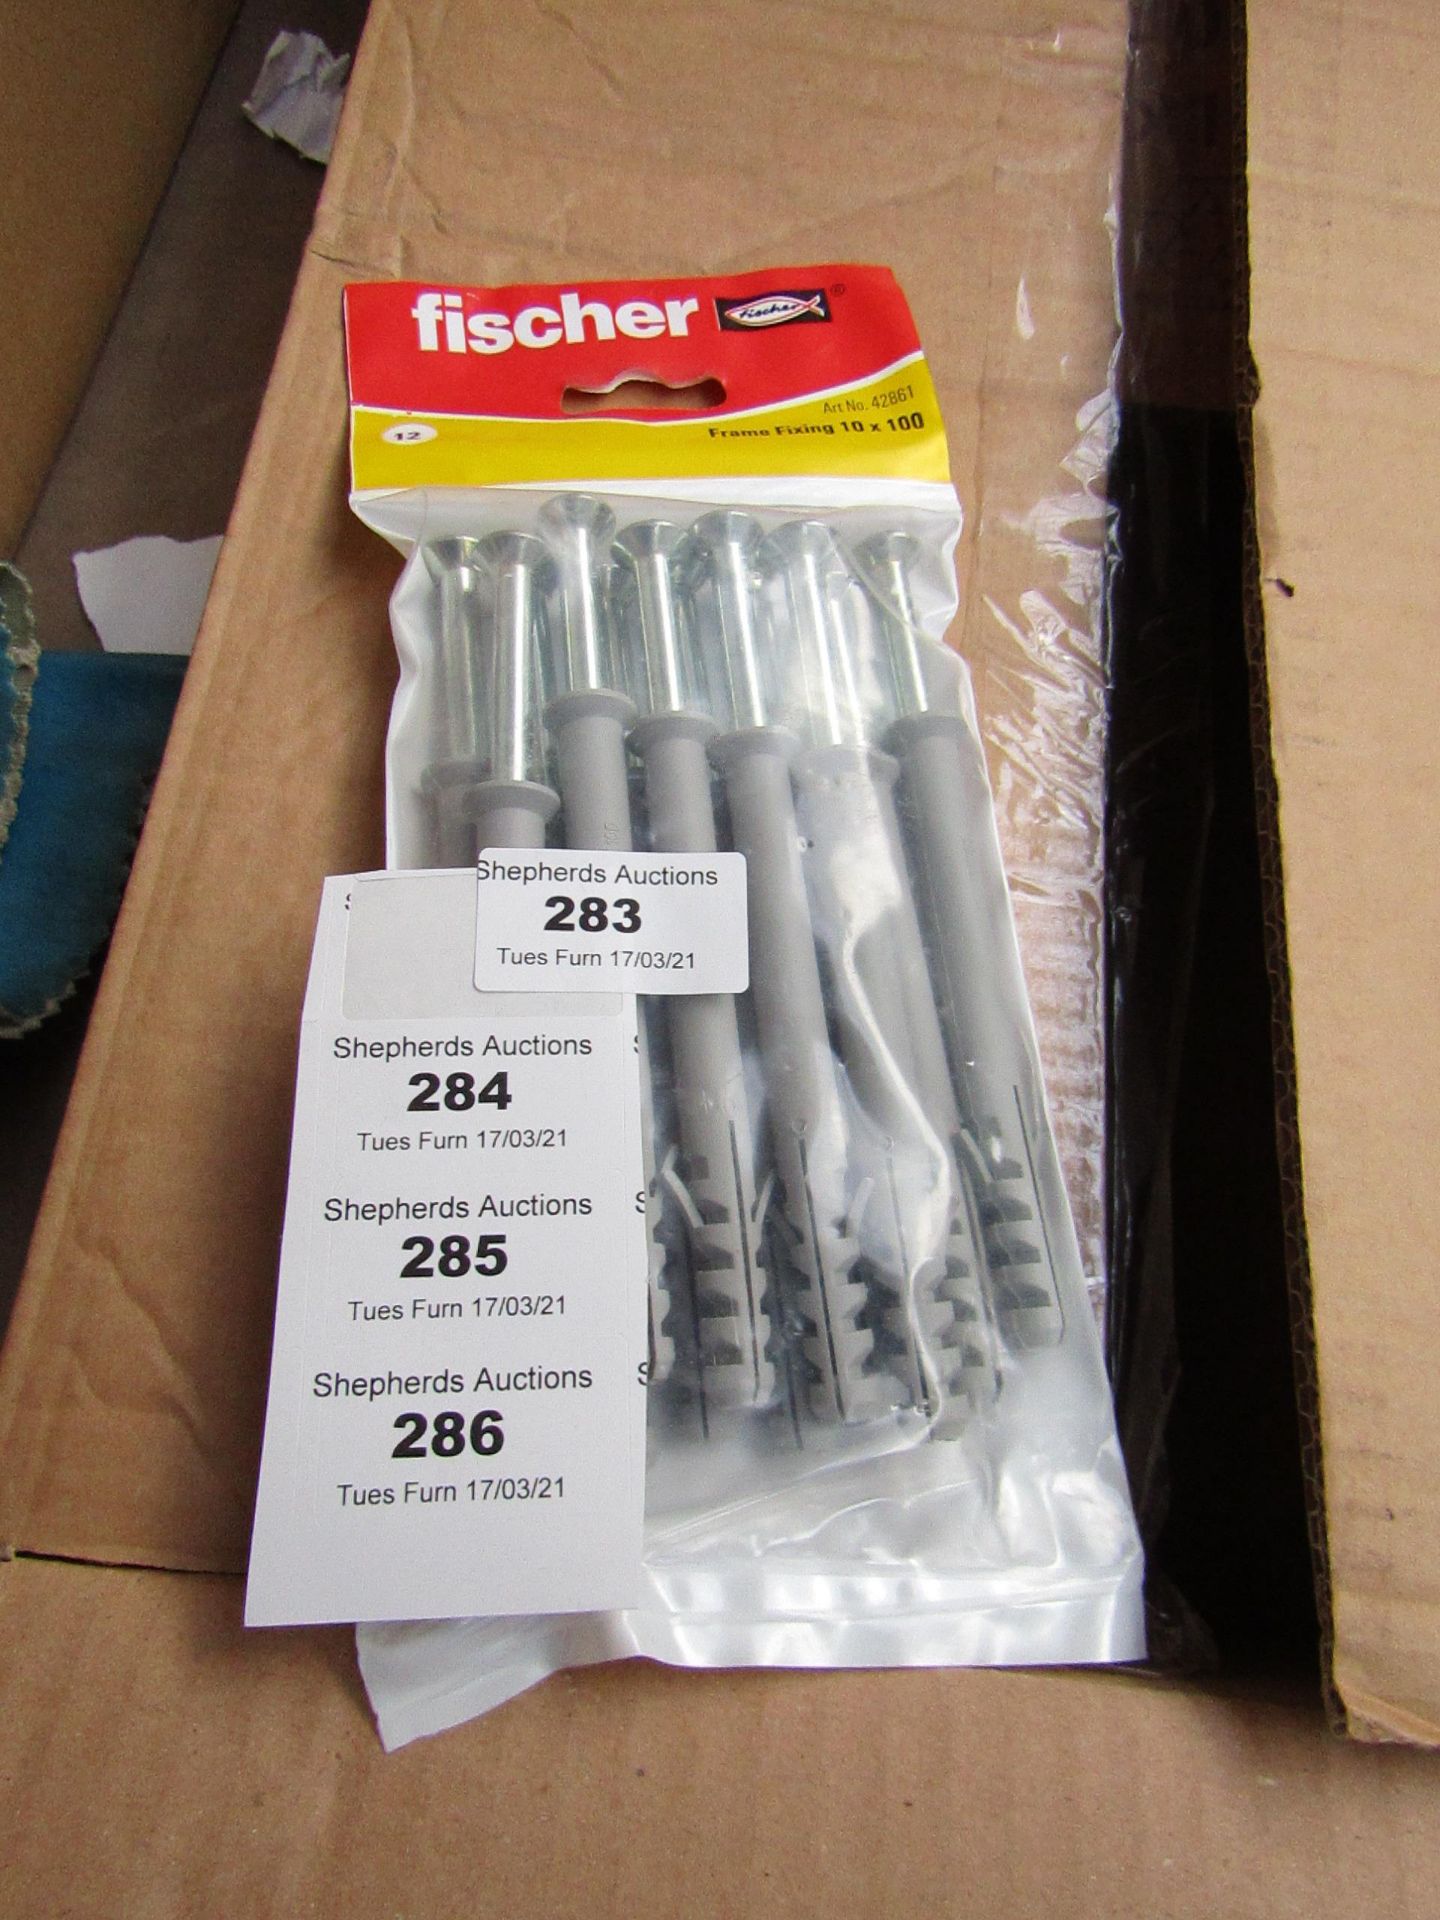 5x Packets of 12n Fischer 10x100 Frame Fixings - New & Packaged.